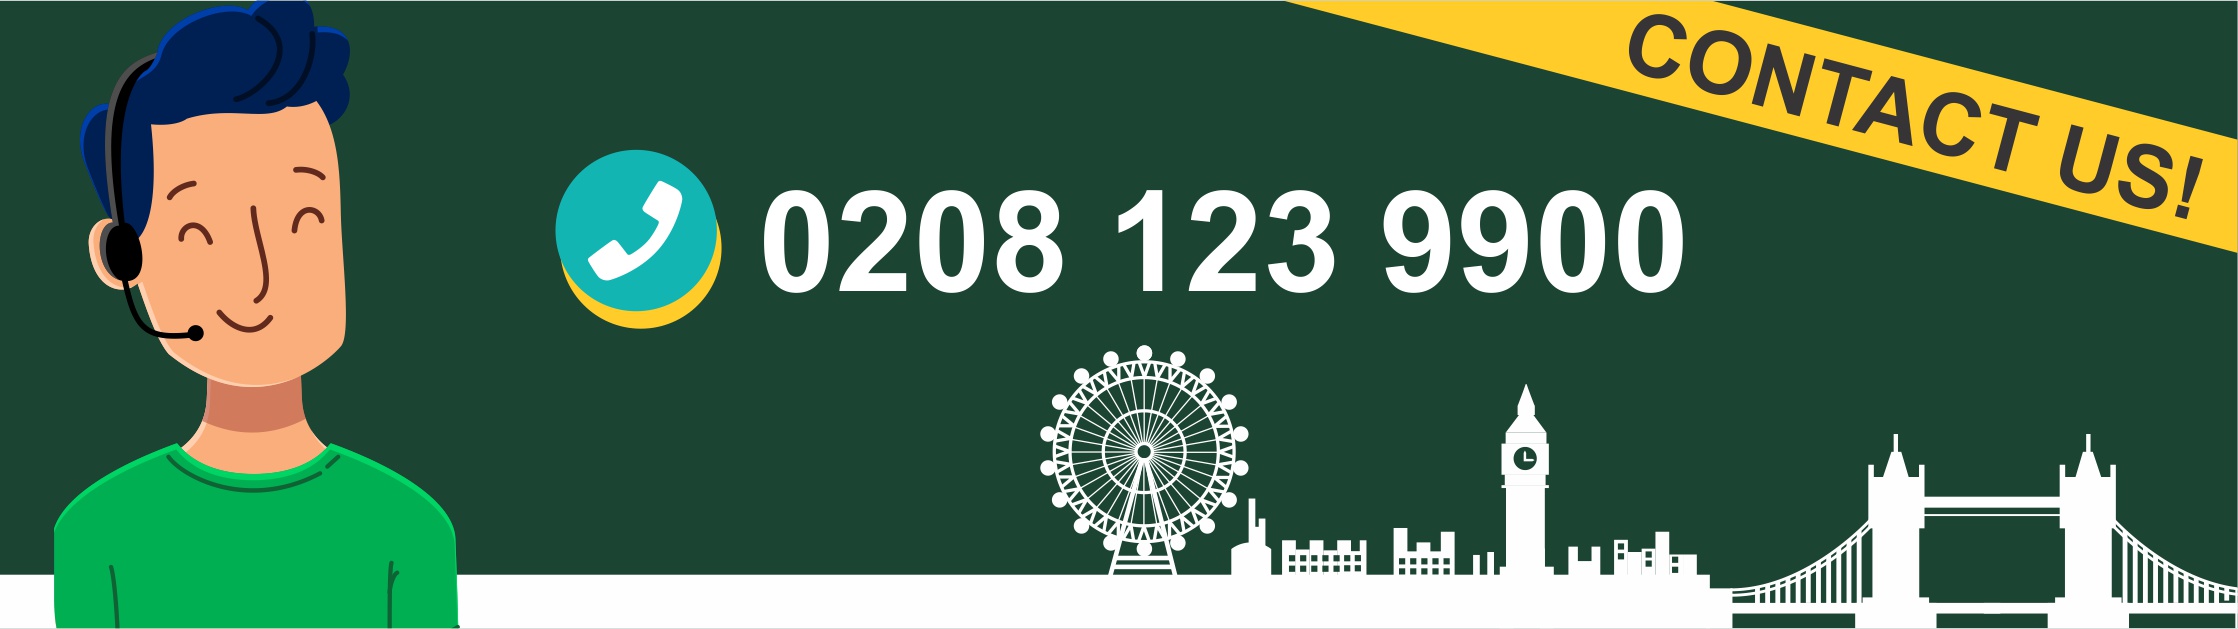 PIA London office Contact Number